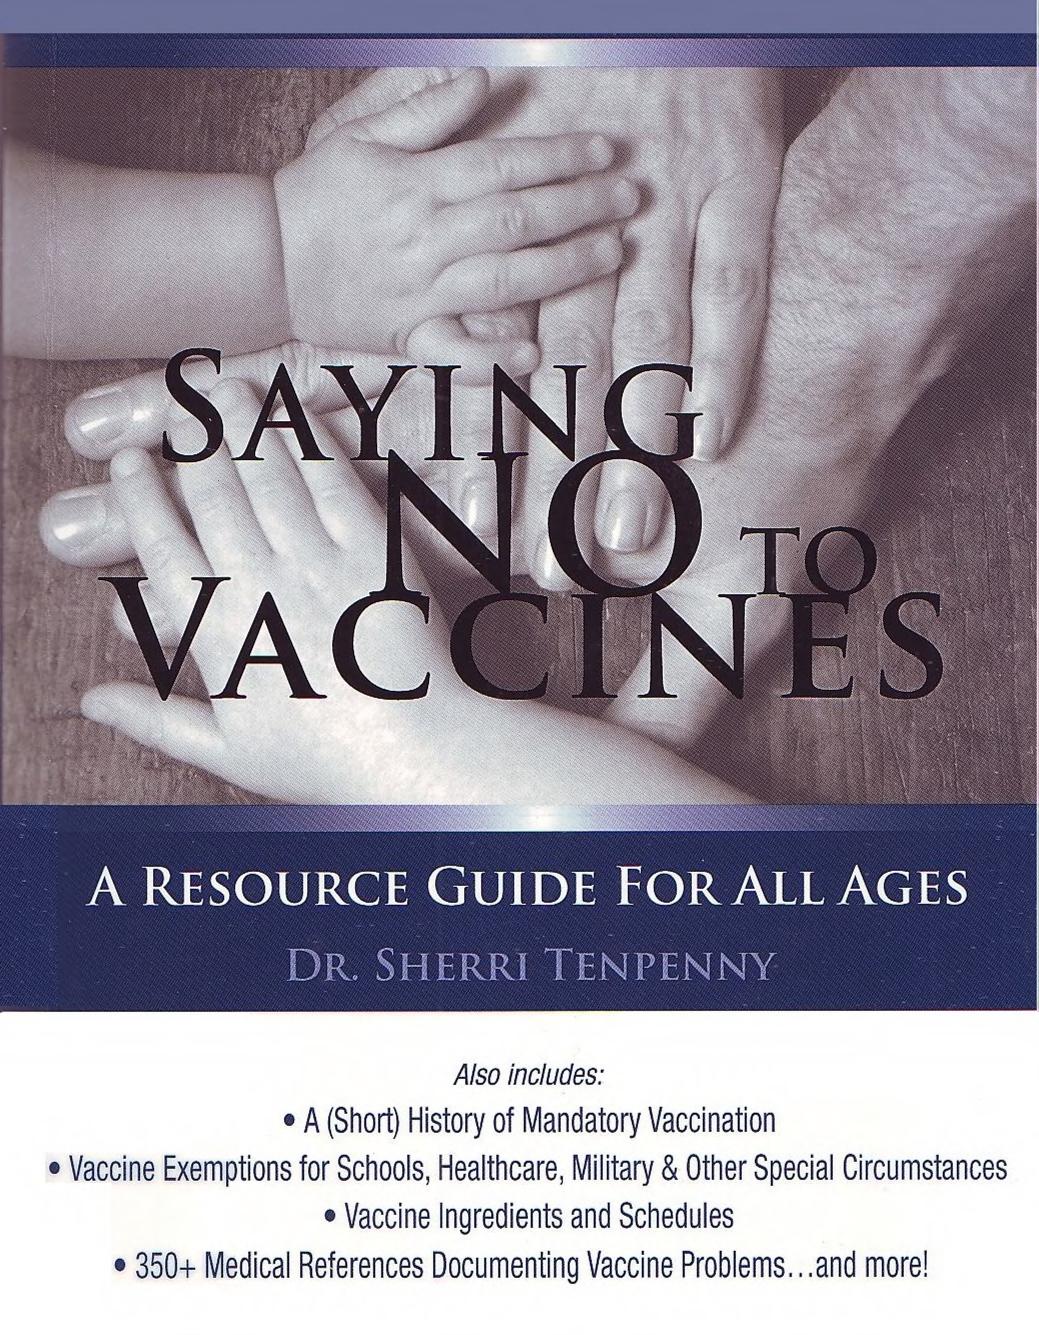 Saying No to Vaccines; A Resource Guide for All Ages by Sherri Tenpenny